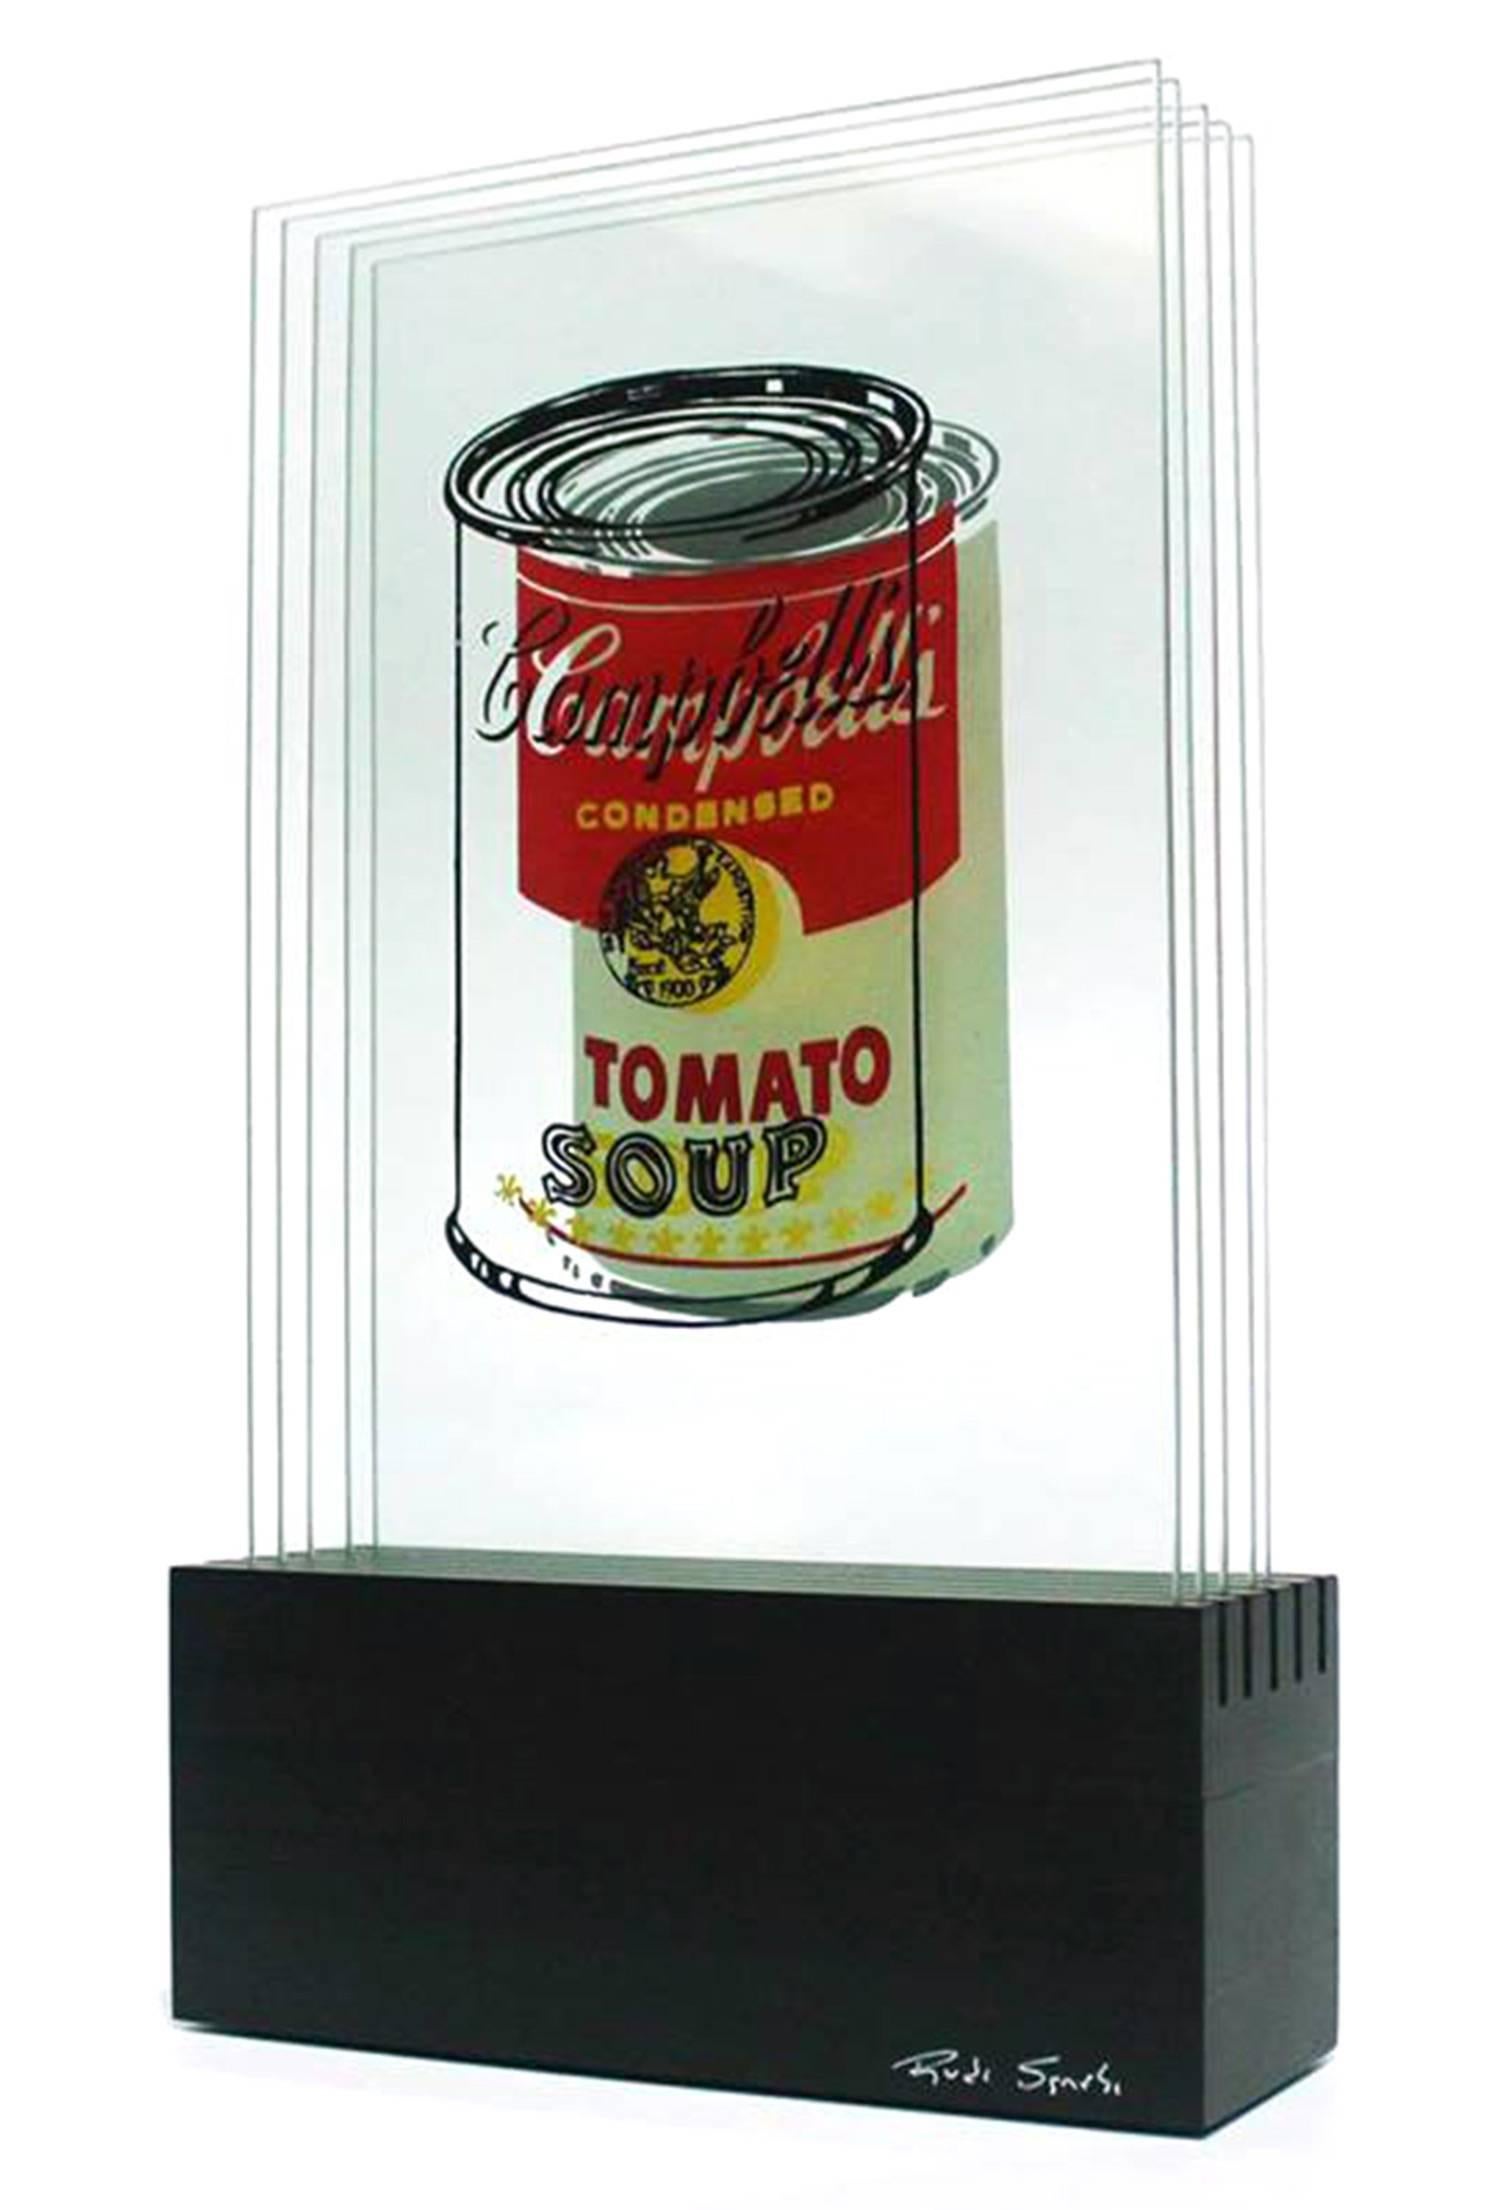 Rudi Sgarbi Abstract Sculpture - "Campbell's Tomato Soup" 3D Glass Sculpture After Andy Warhol Tomato Soup